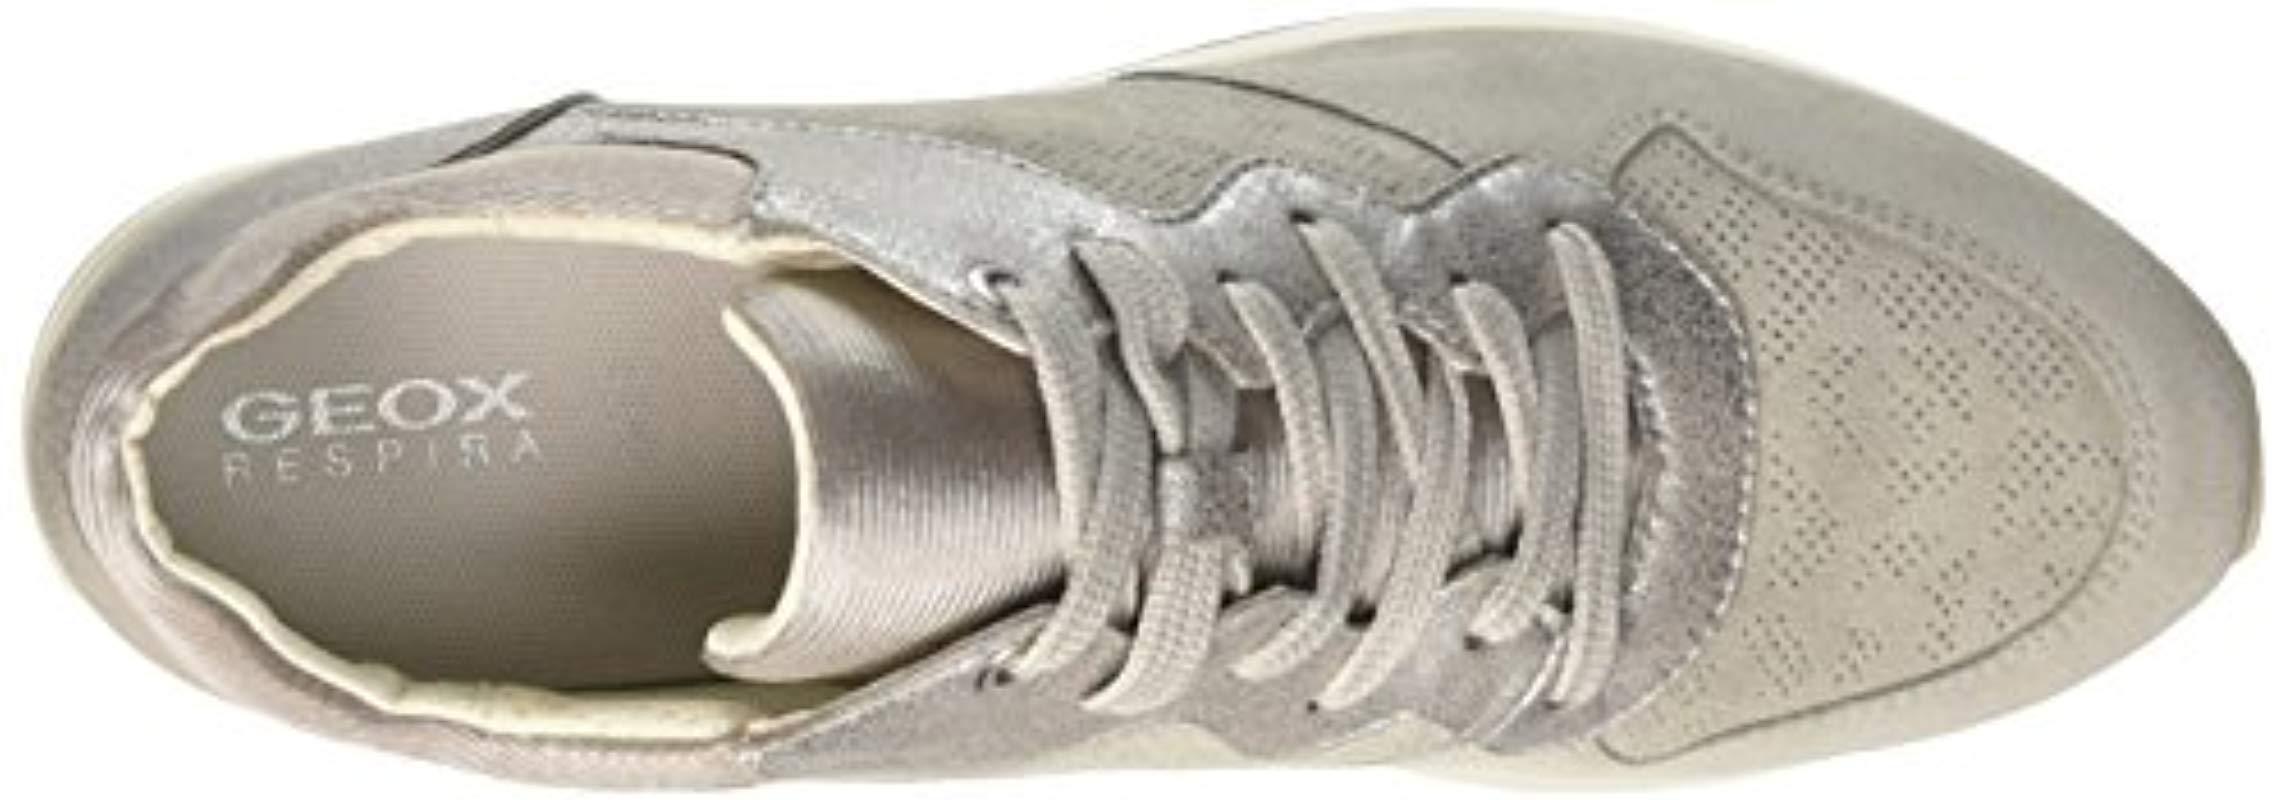 Geox Suede D Zosma C Trainers in Grey - Save 60% - Lyst